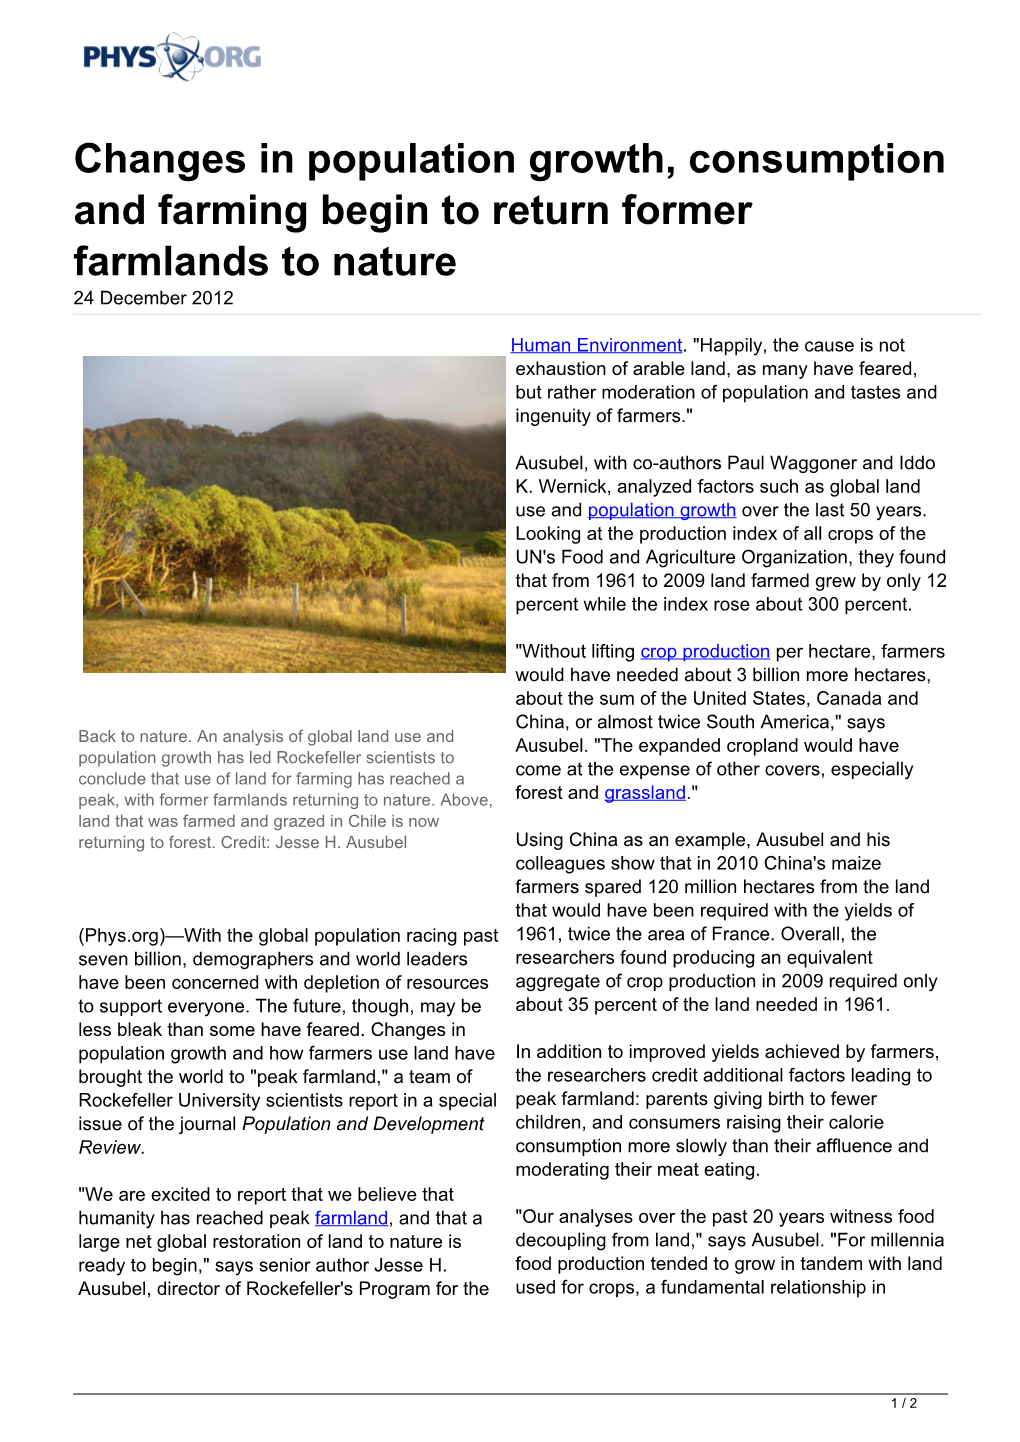 Changes in Population Growth, Consumption and Farming Begin to Return Former Farmlands to Nature 24 December 2012